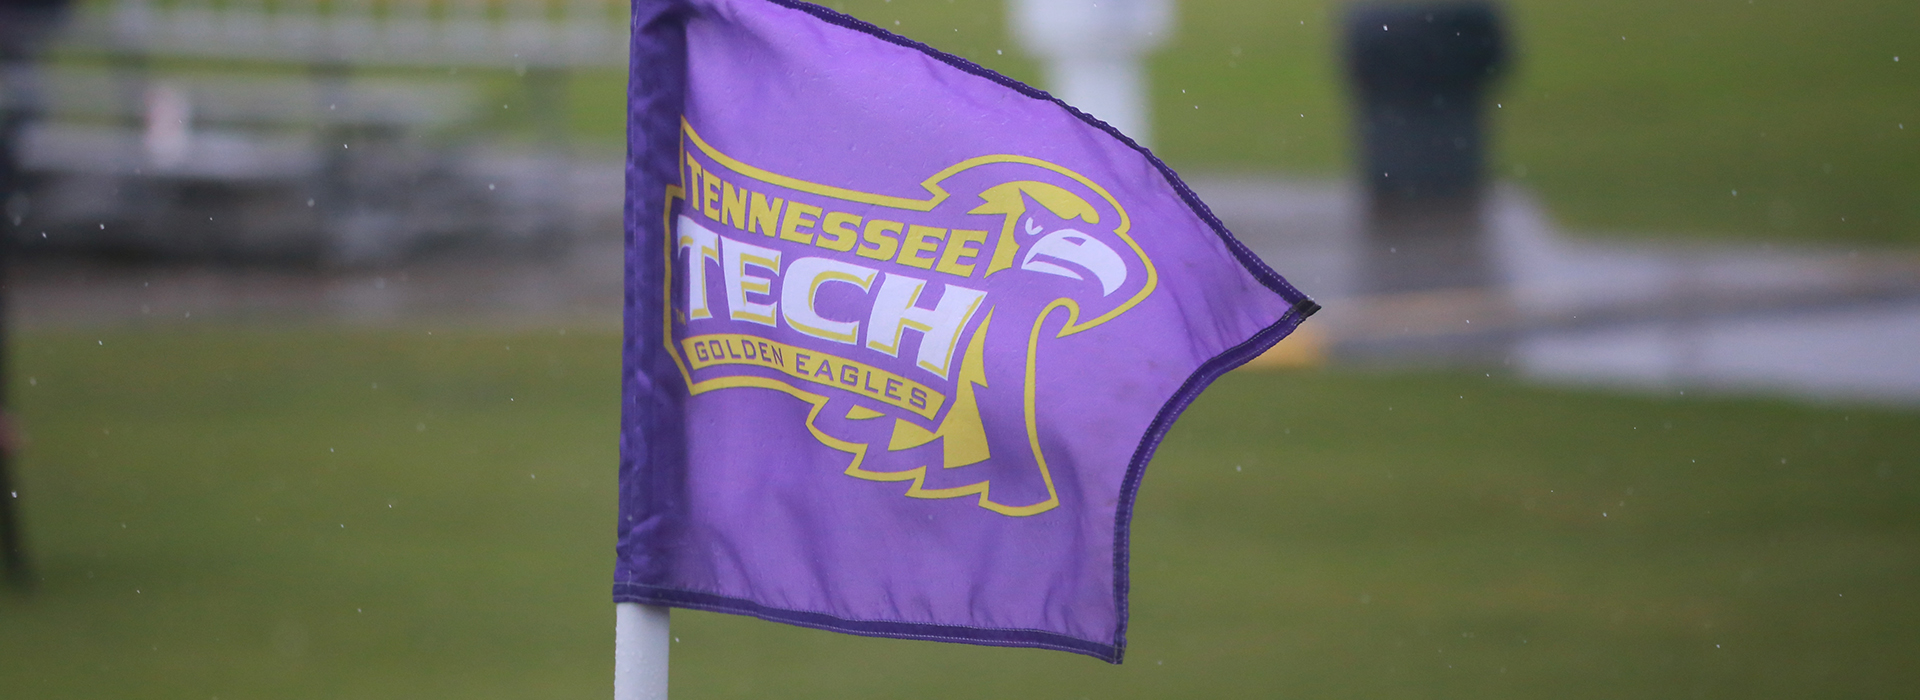 Sunday’s Tech soccer match against Belmont postponed to Tuesday, Oct. 12